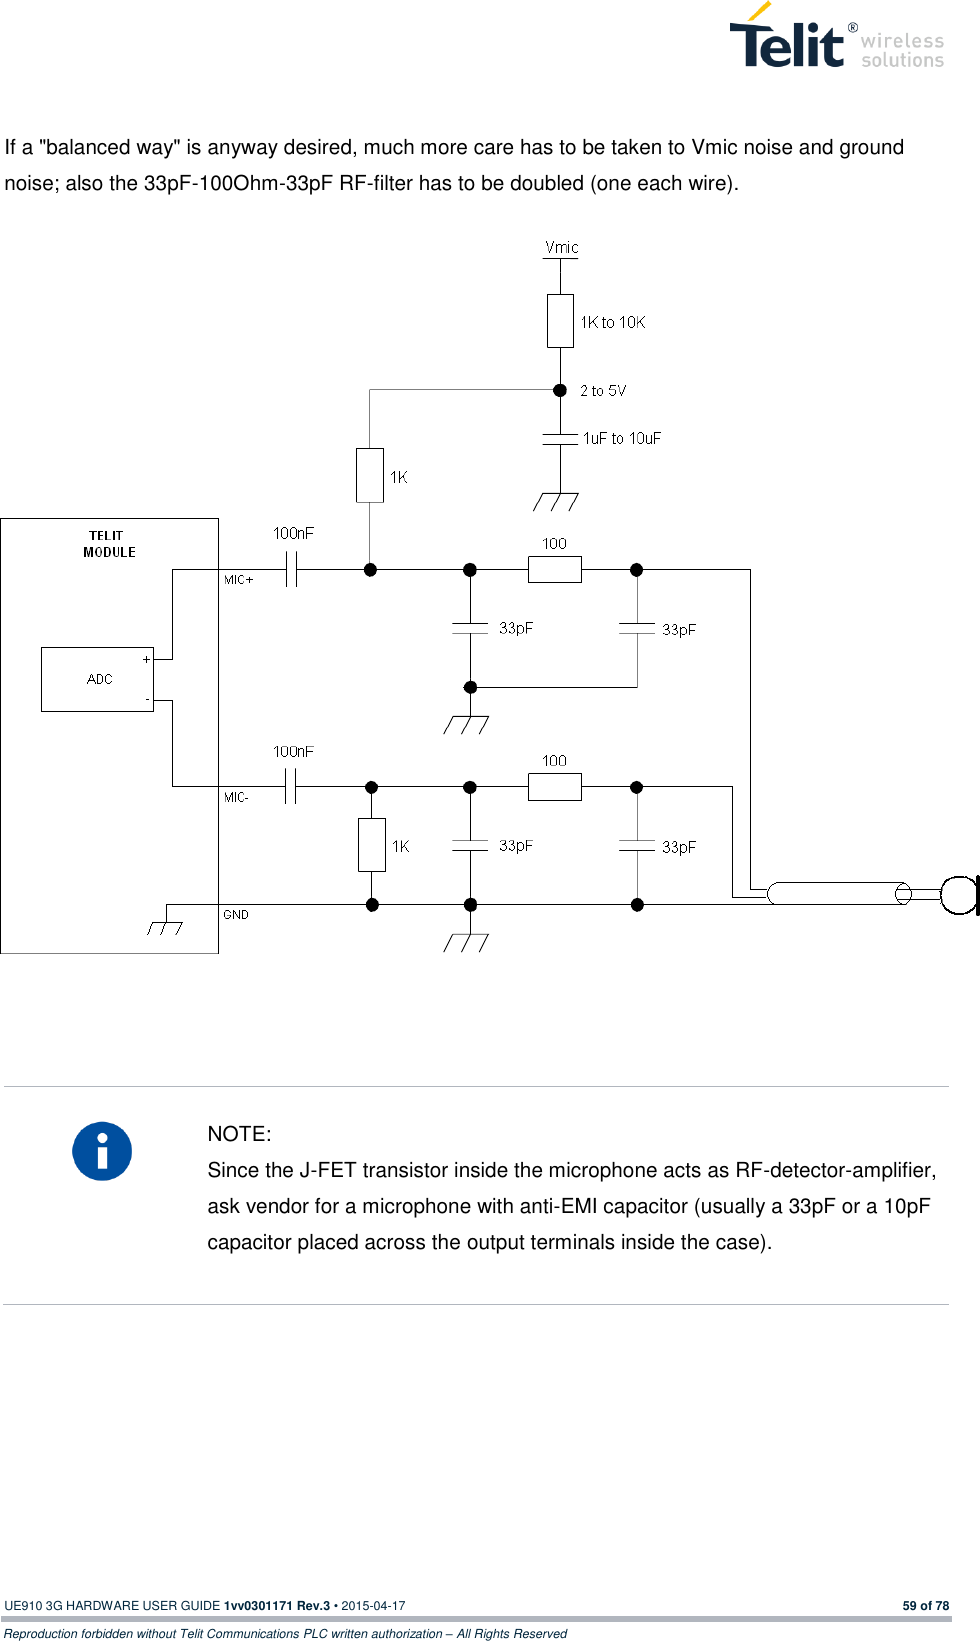  UE910 3G HARDWARE USER GUIDE 1vv0301171 Rev.3 • 2015-04-17 59 of 78 Reproduction forbidden without Telit Communications PLC written authorization – All Rights Reserved   If a &quot;balanced way&quot; is anyway desired, much more care has to be taken to Vmic noise and ground noise; also the 33pF-100Ohm-33pF RF-filter has to be doubled (one each wire).      NOTE: Since the J-FET transistor inside the microphone acts as RF-detector-amplifier, ask vendor for a microphone with anti-EMI capacitor (usually a 33pF or a 10pF capacitor placed across the output terminals inside the case).         